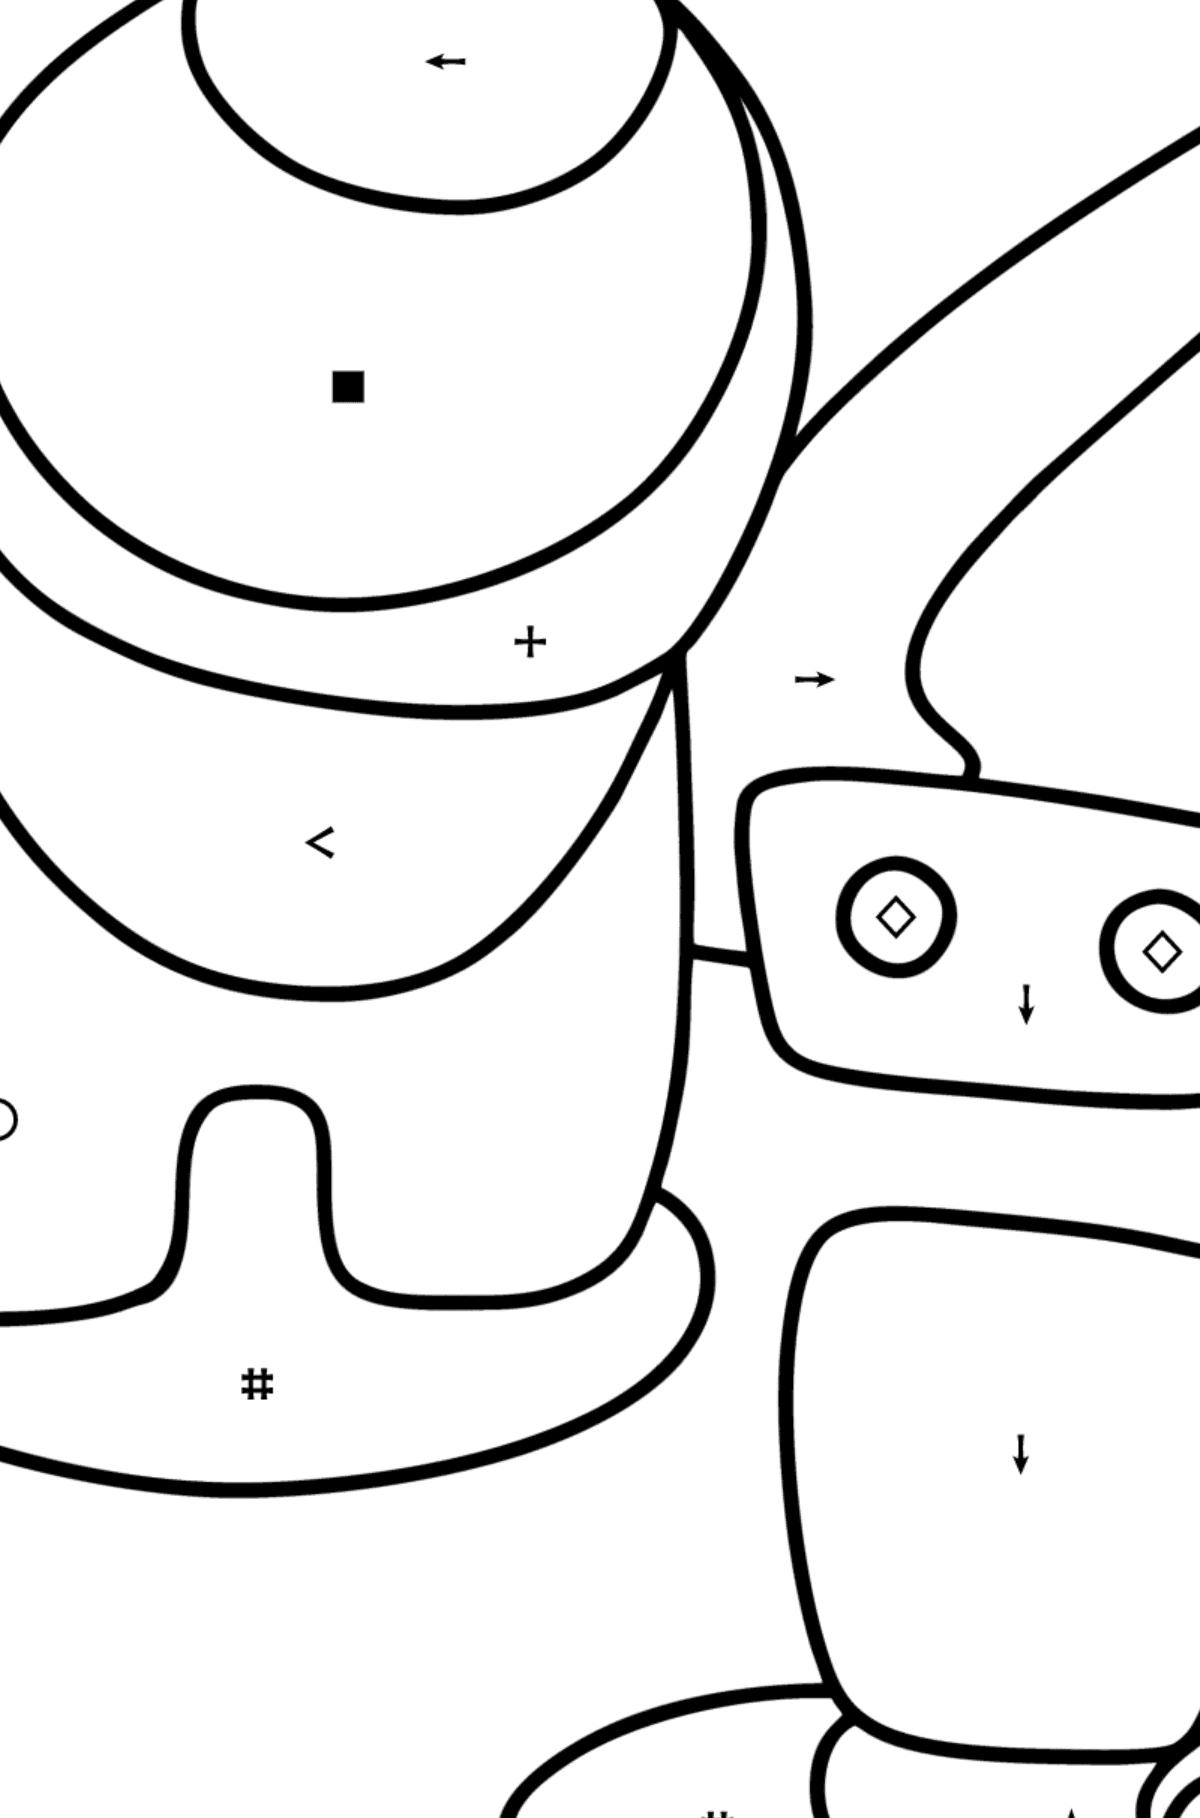 Coloring page astronaut and pet robot Among Us - Coloring by Symbols and Geometric Shapes for Kids